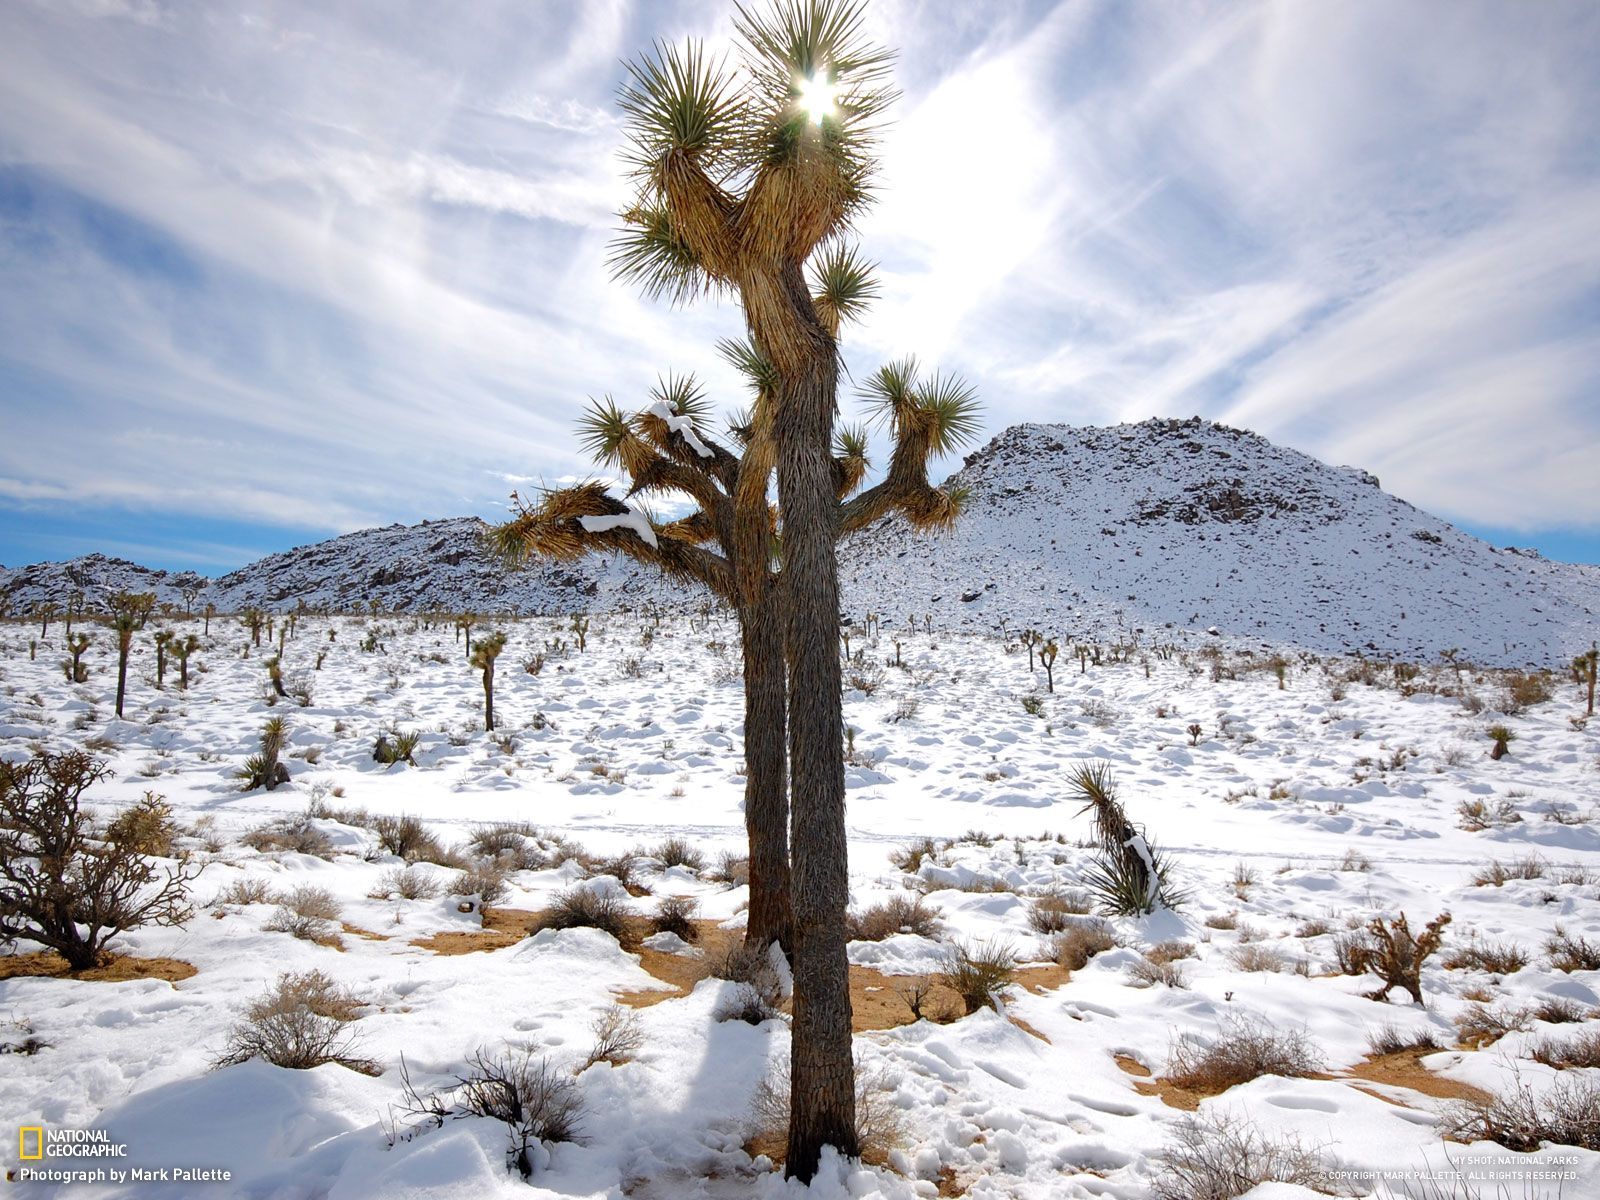 Wallpaper, Photo, Picture, Photography Geographic. Joshua tree national park, California national parks, National parks